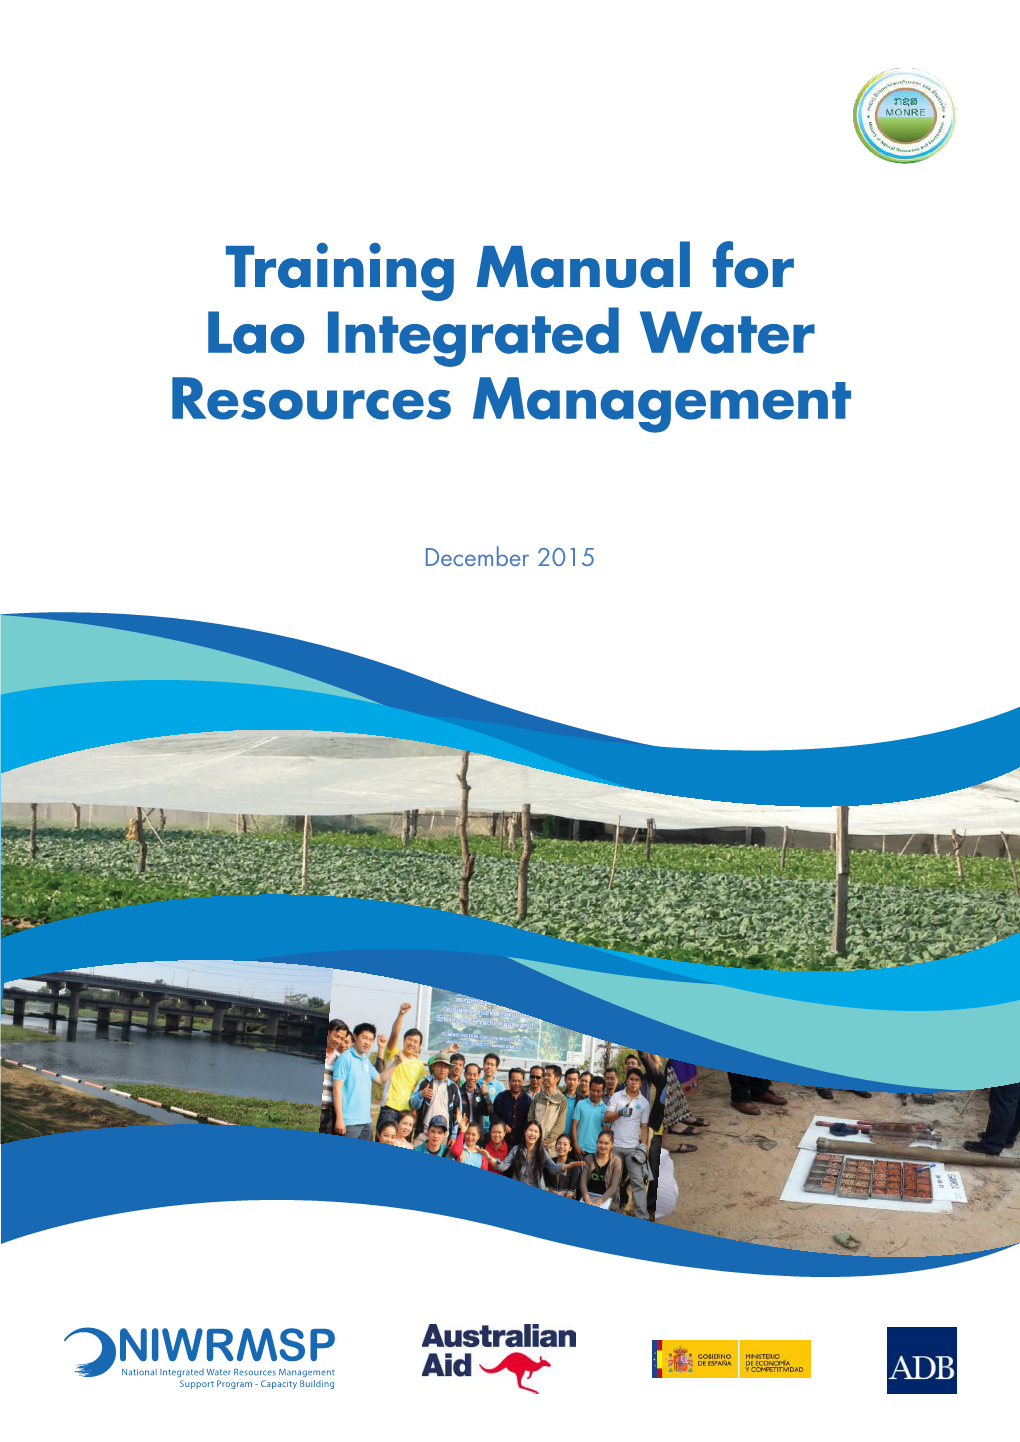 Training Manual for Lao Integrated Water Resources Management